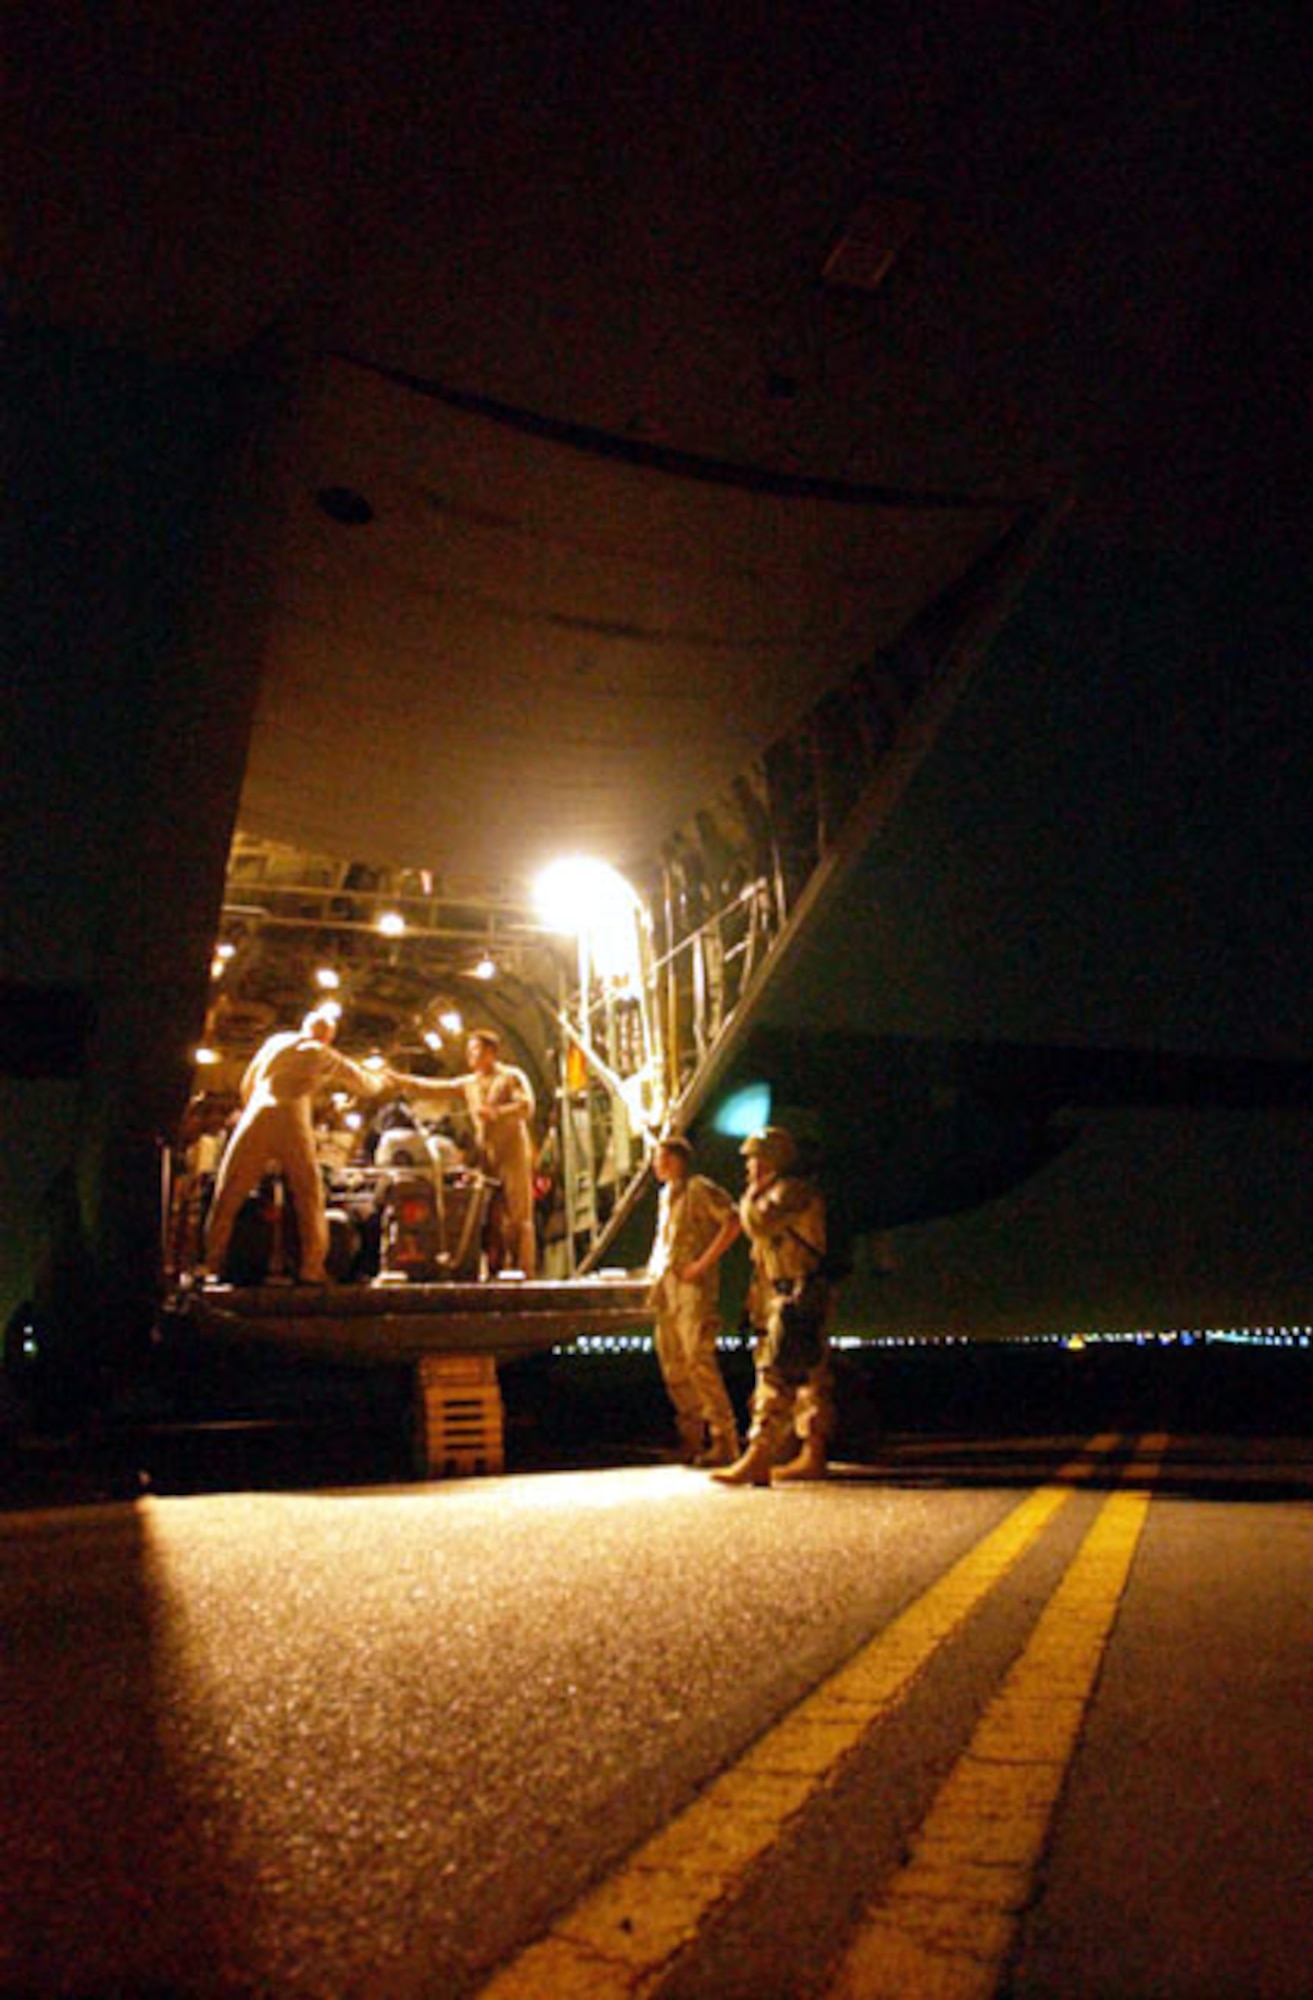 OPERATION IRAQI FREEDOM -- U.S. Air Force personnel secure humanitarian pallets onto a C-130 Hercules that will be flown to Baghdad to help Iraqi citizens in need. The flight marked the first of flights delivering supplies that are being donated from the people of Kuwait as part of a coordinated effort with the U.S. military to transport and deliver aid to the people of Iraq in support of Operation Iraqi Freedom. (U.S. Navy photo by PH1(SW) Arlo Abrahamson)